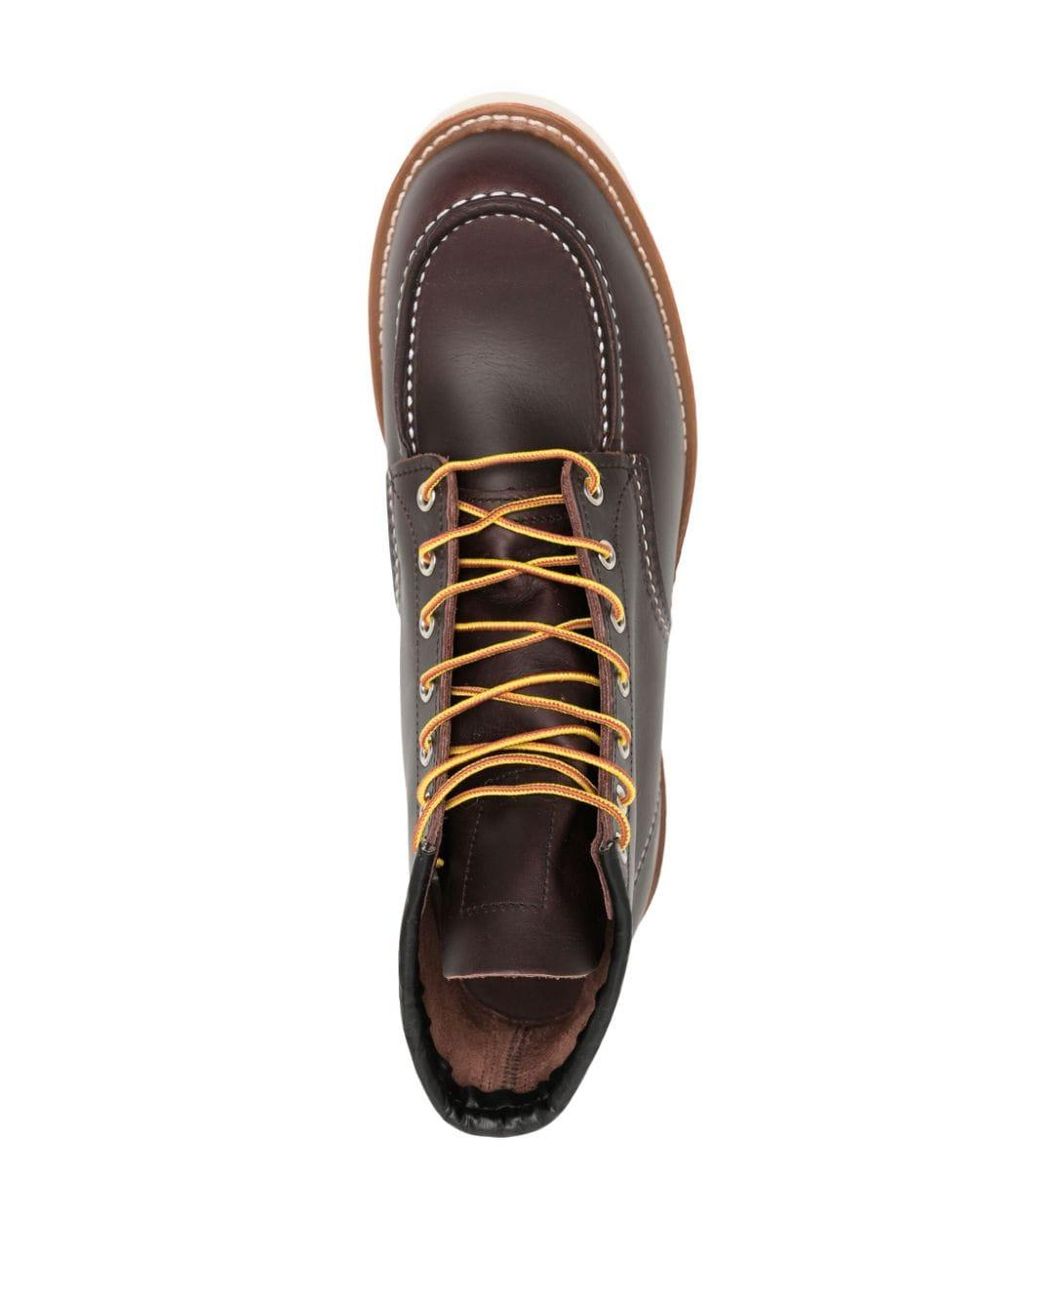 Red Wing Shoes Classic Moc Leather Boots - Farfetch